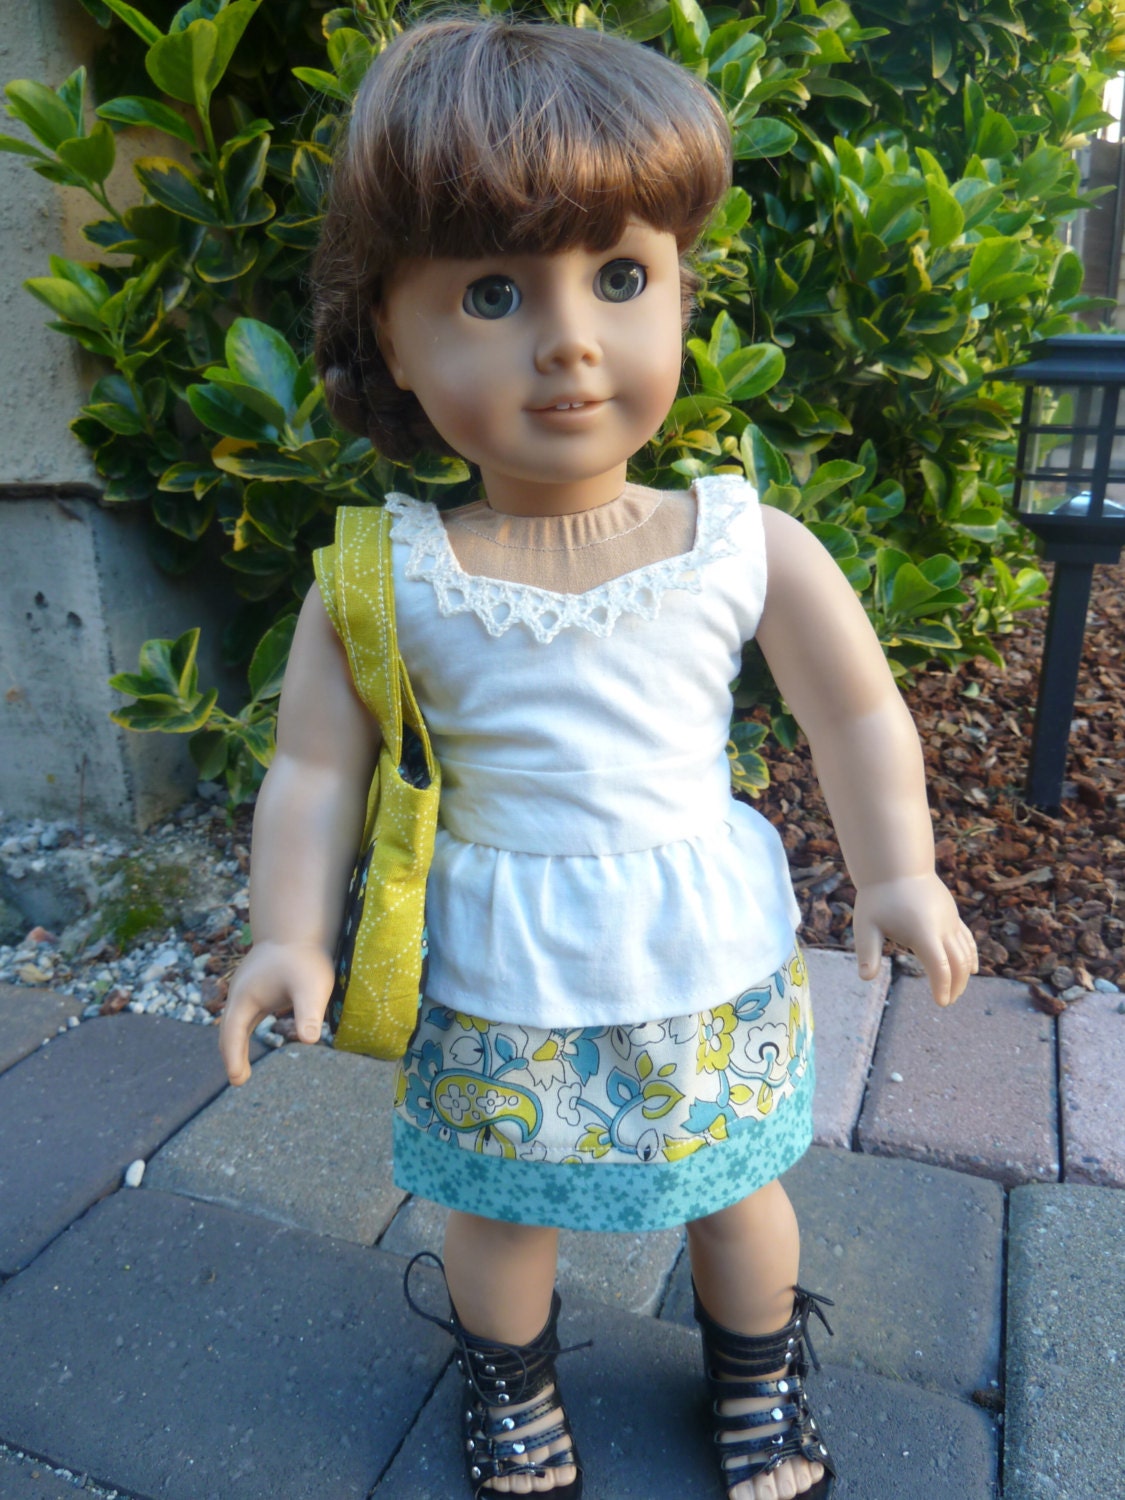 American Girl Doll Clothes - A Fresh Start Teal and Lime 3 piece outfit includes skirt, peplum top and purse